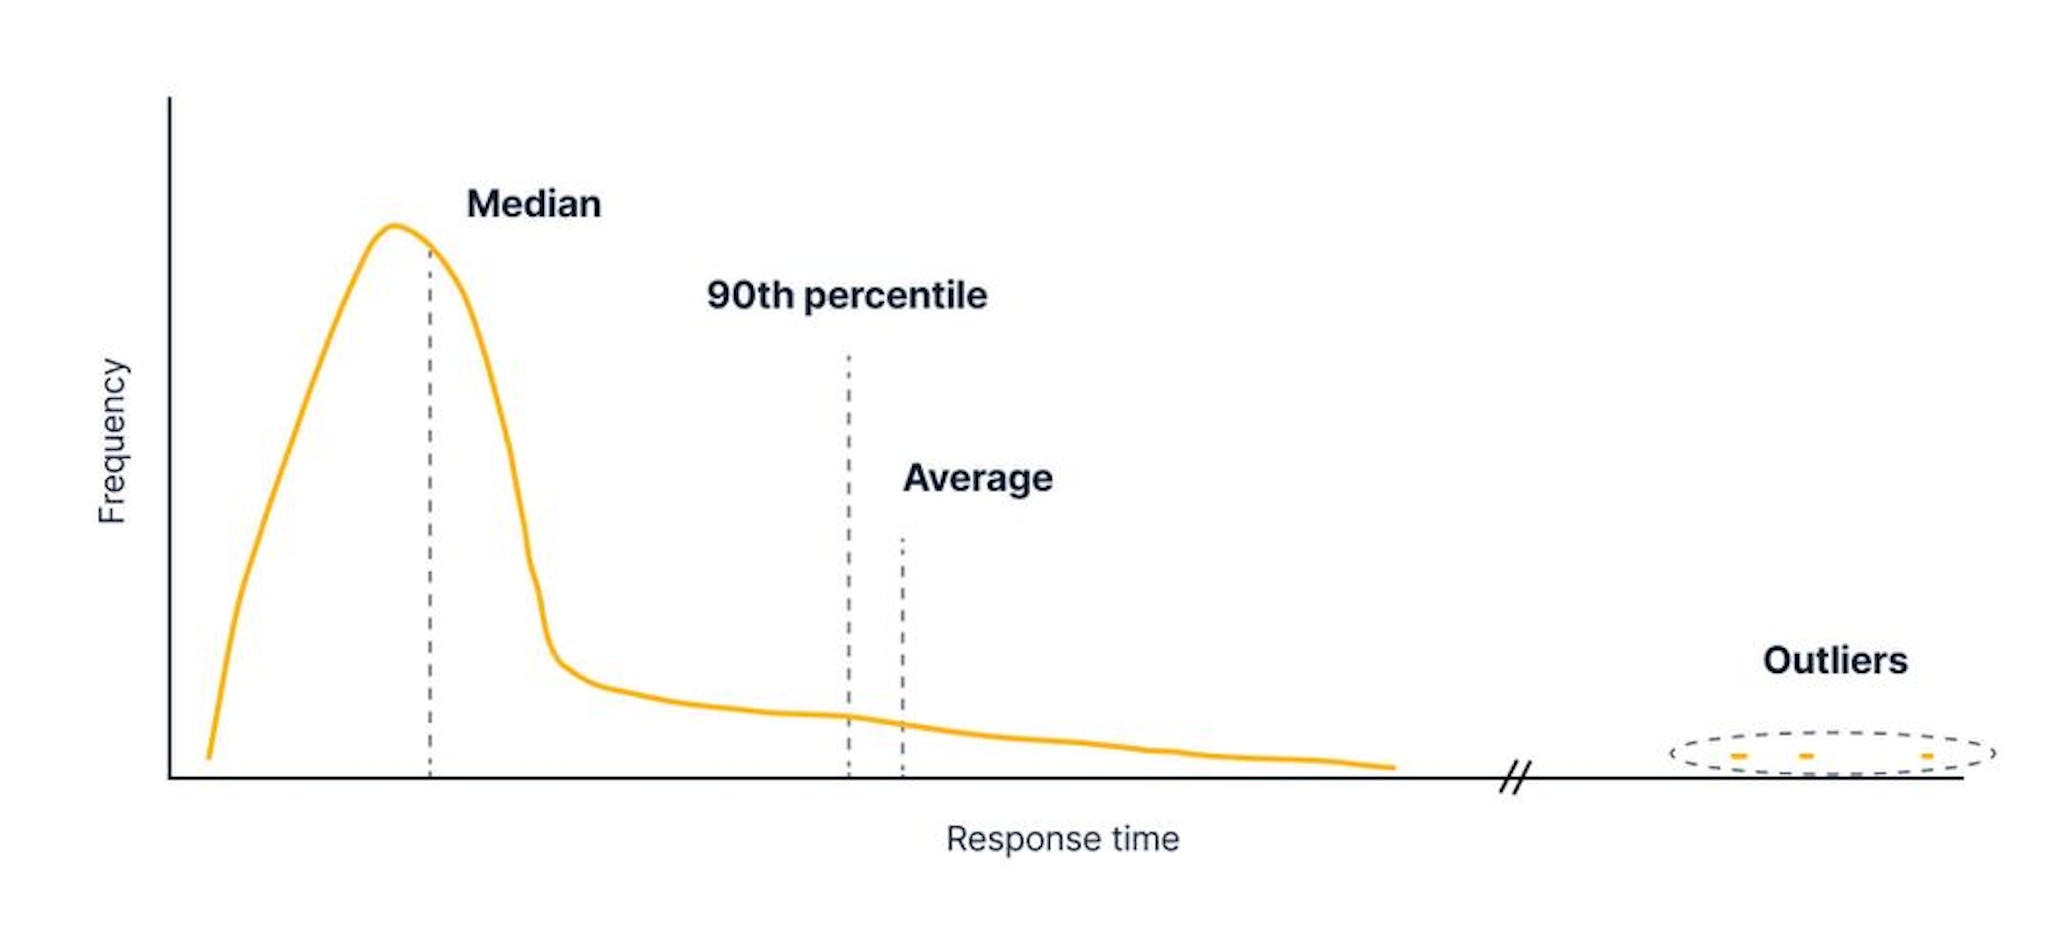 Outliers affect the average but don’t impact the 90th percentile or median. (Graph is not to scale.)